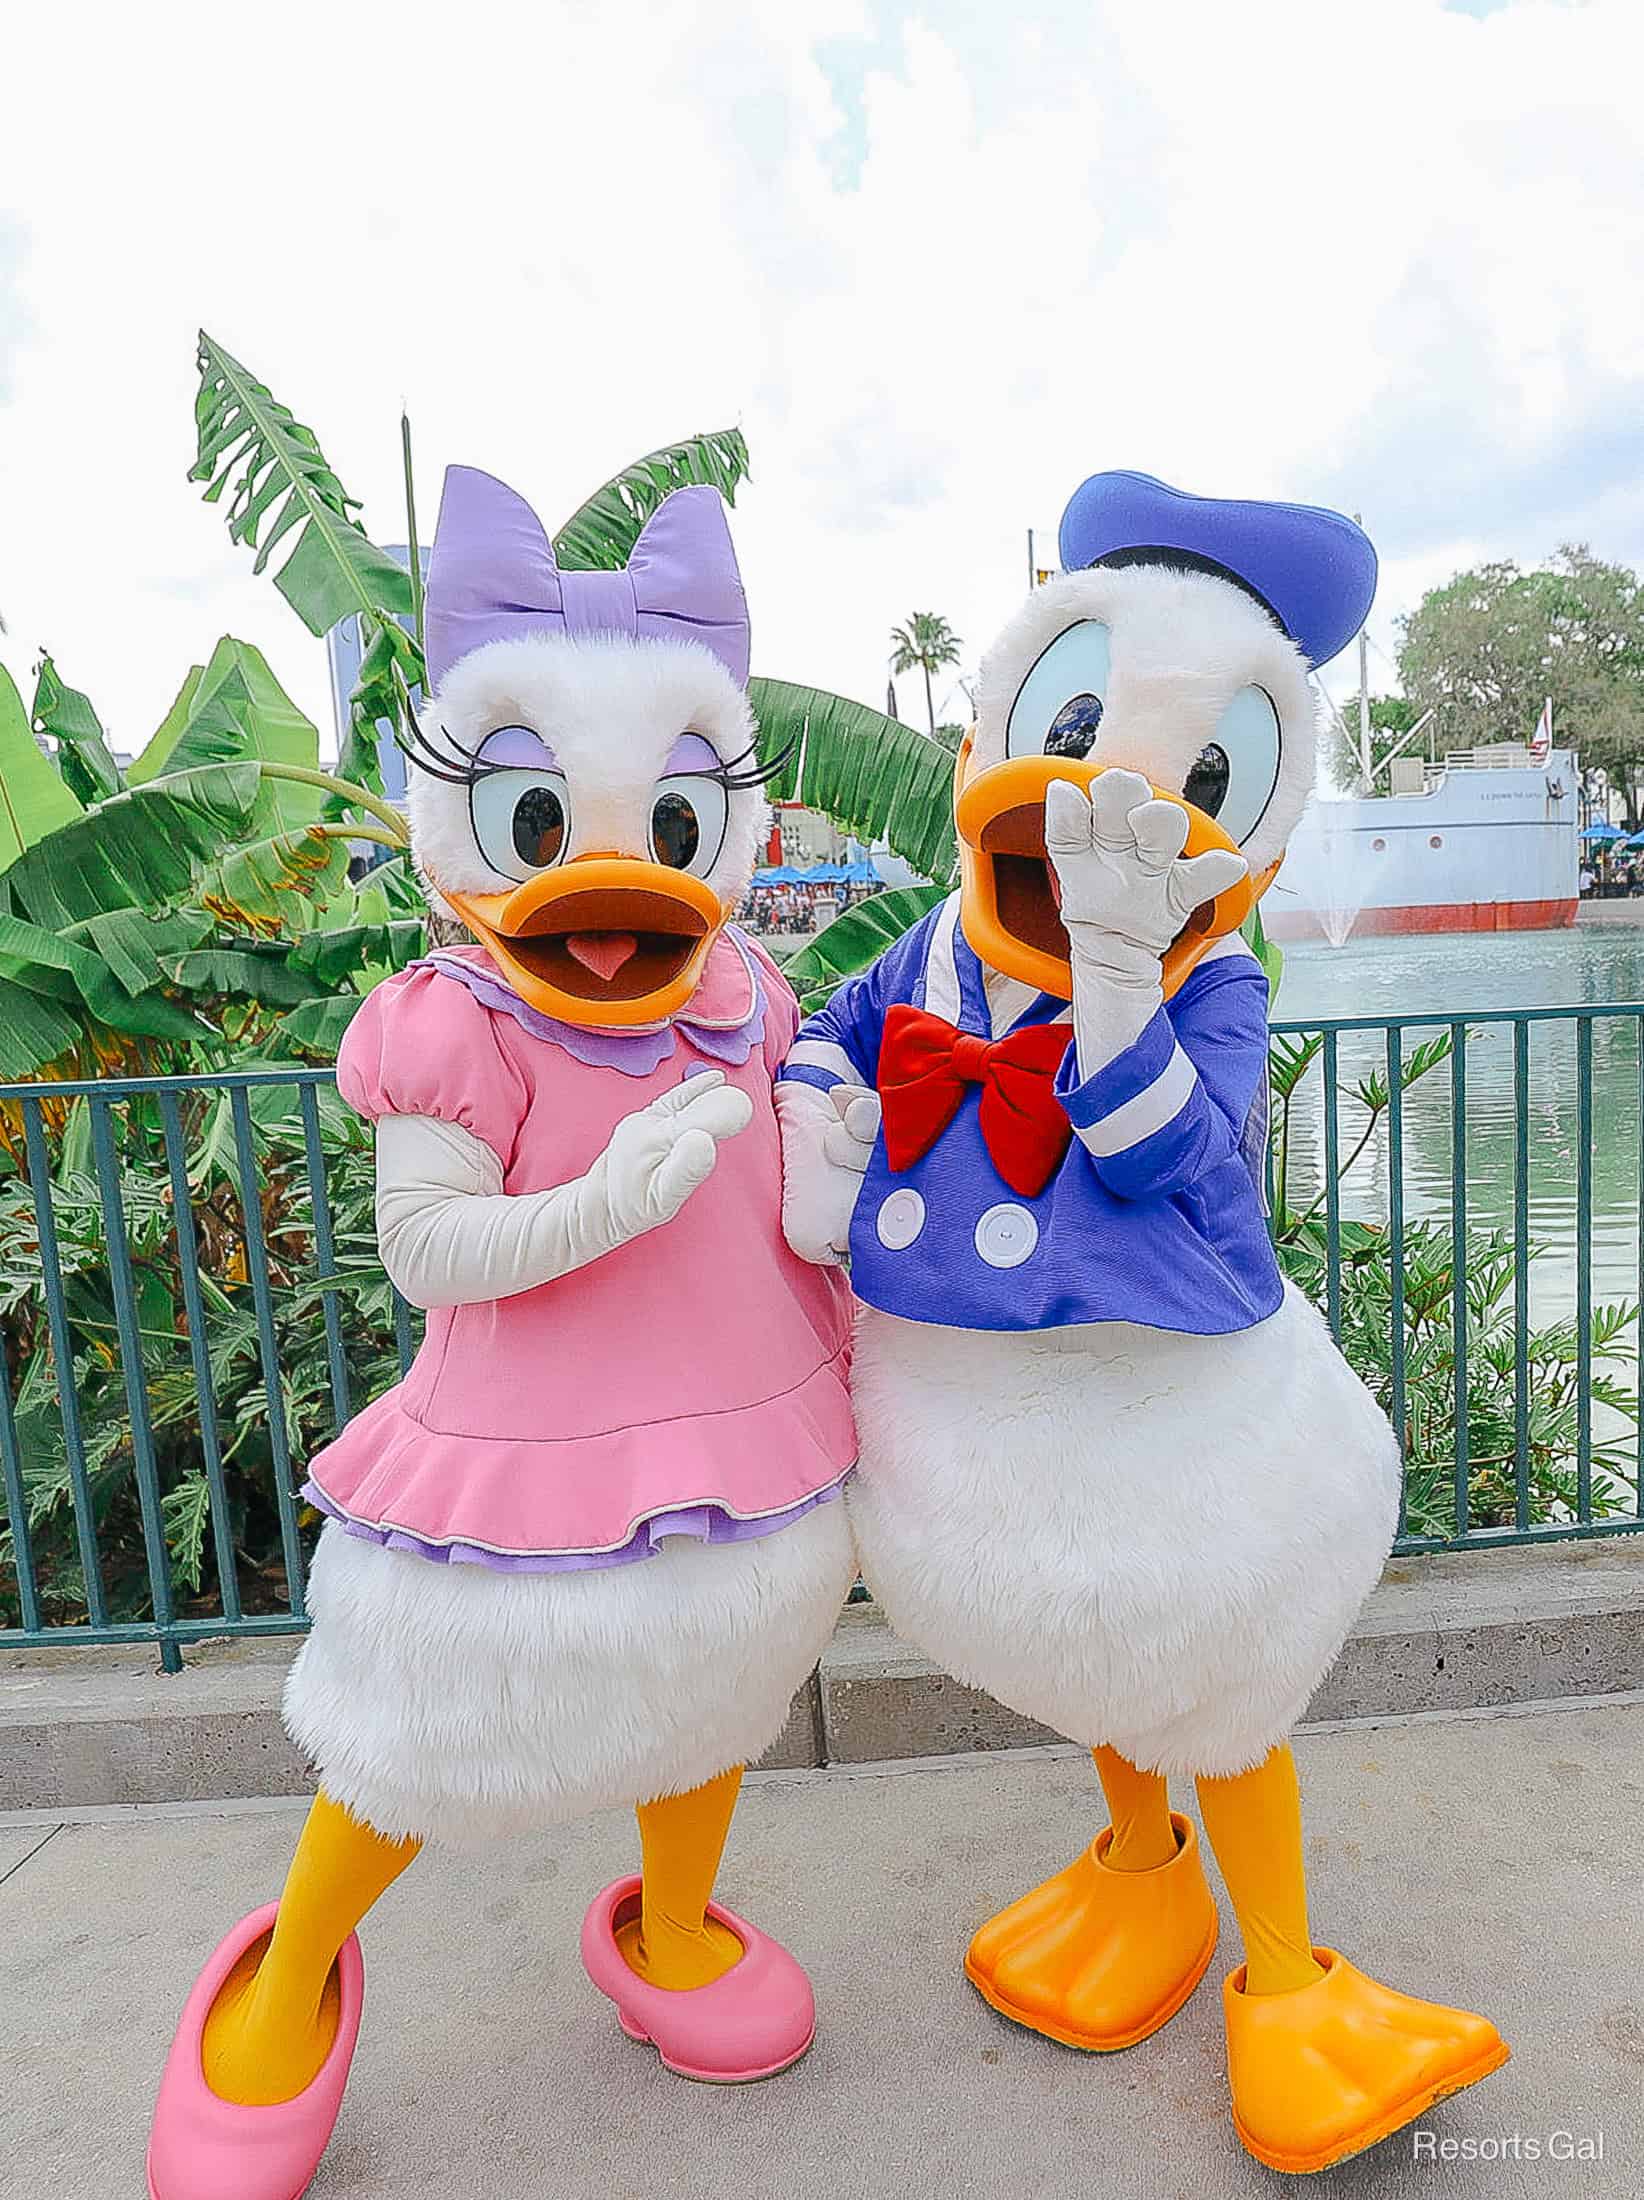 Daisy poses with her leg out while Donald covers his mouth.